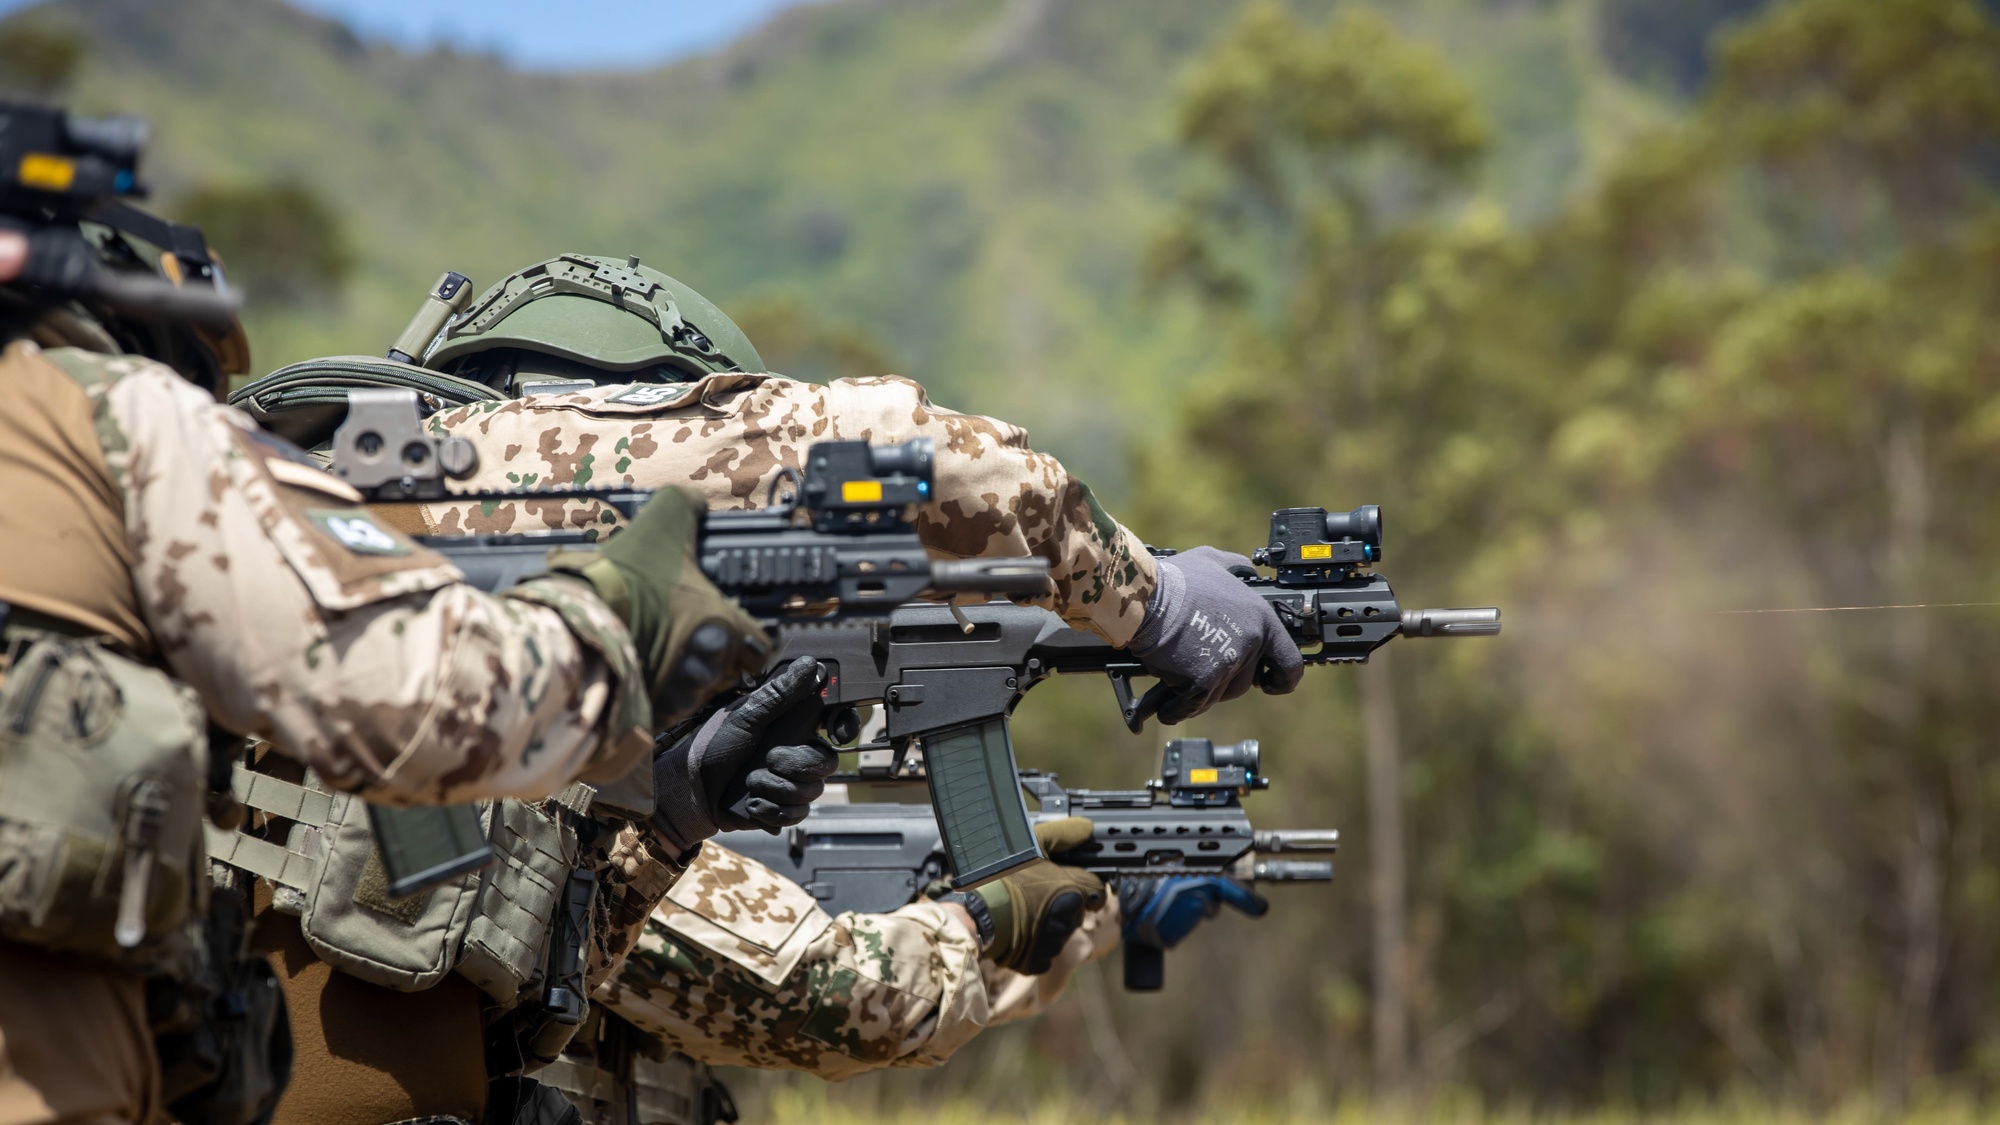 Snipers Hone Their Skills During RIMPAC 2022 > U.S. Indo-Pacific